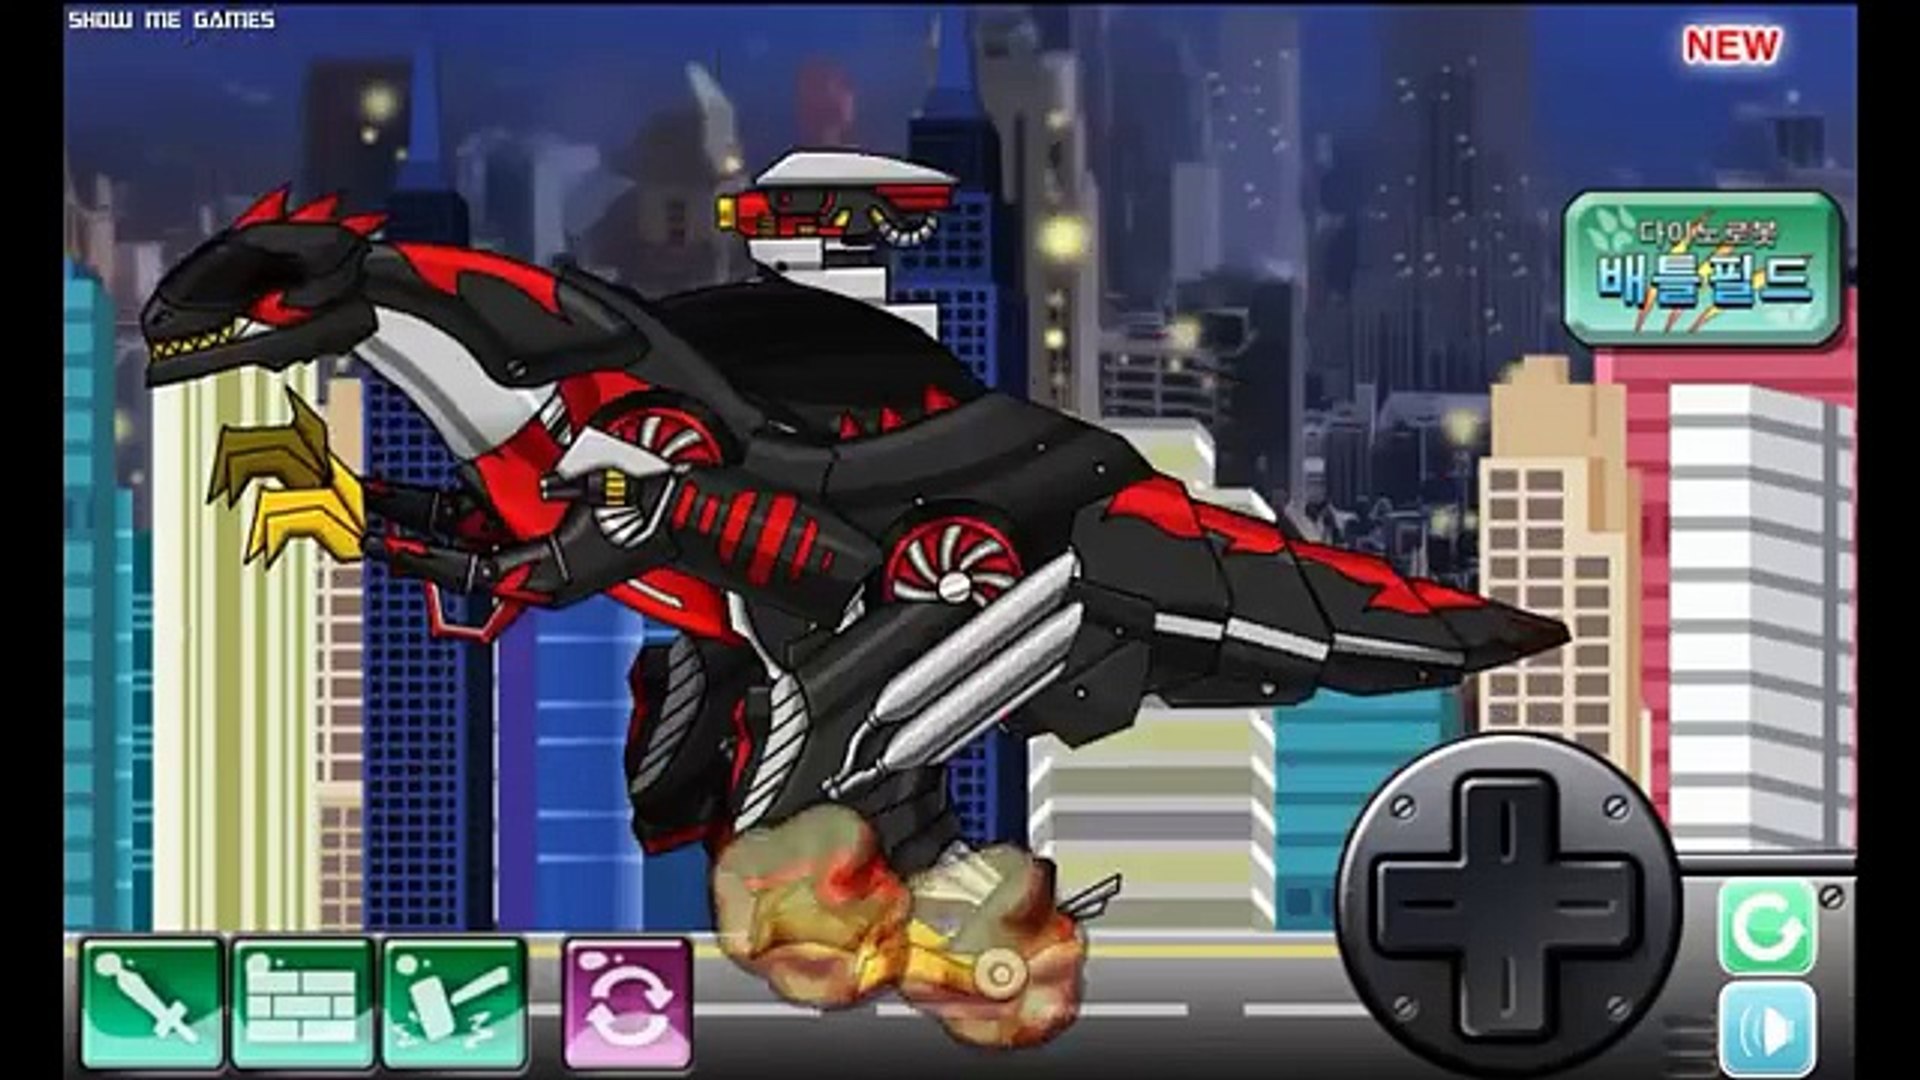 Dino Robot - Allosaurus - Full Game - Game Show - Game Play - new - HD -  Dailymotion Video